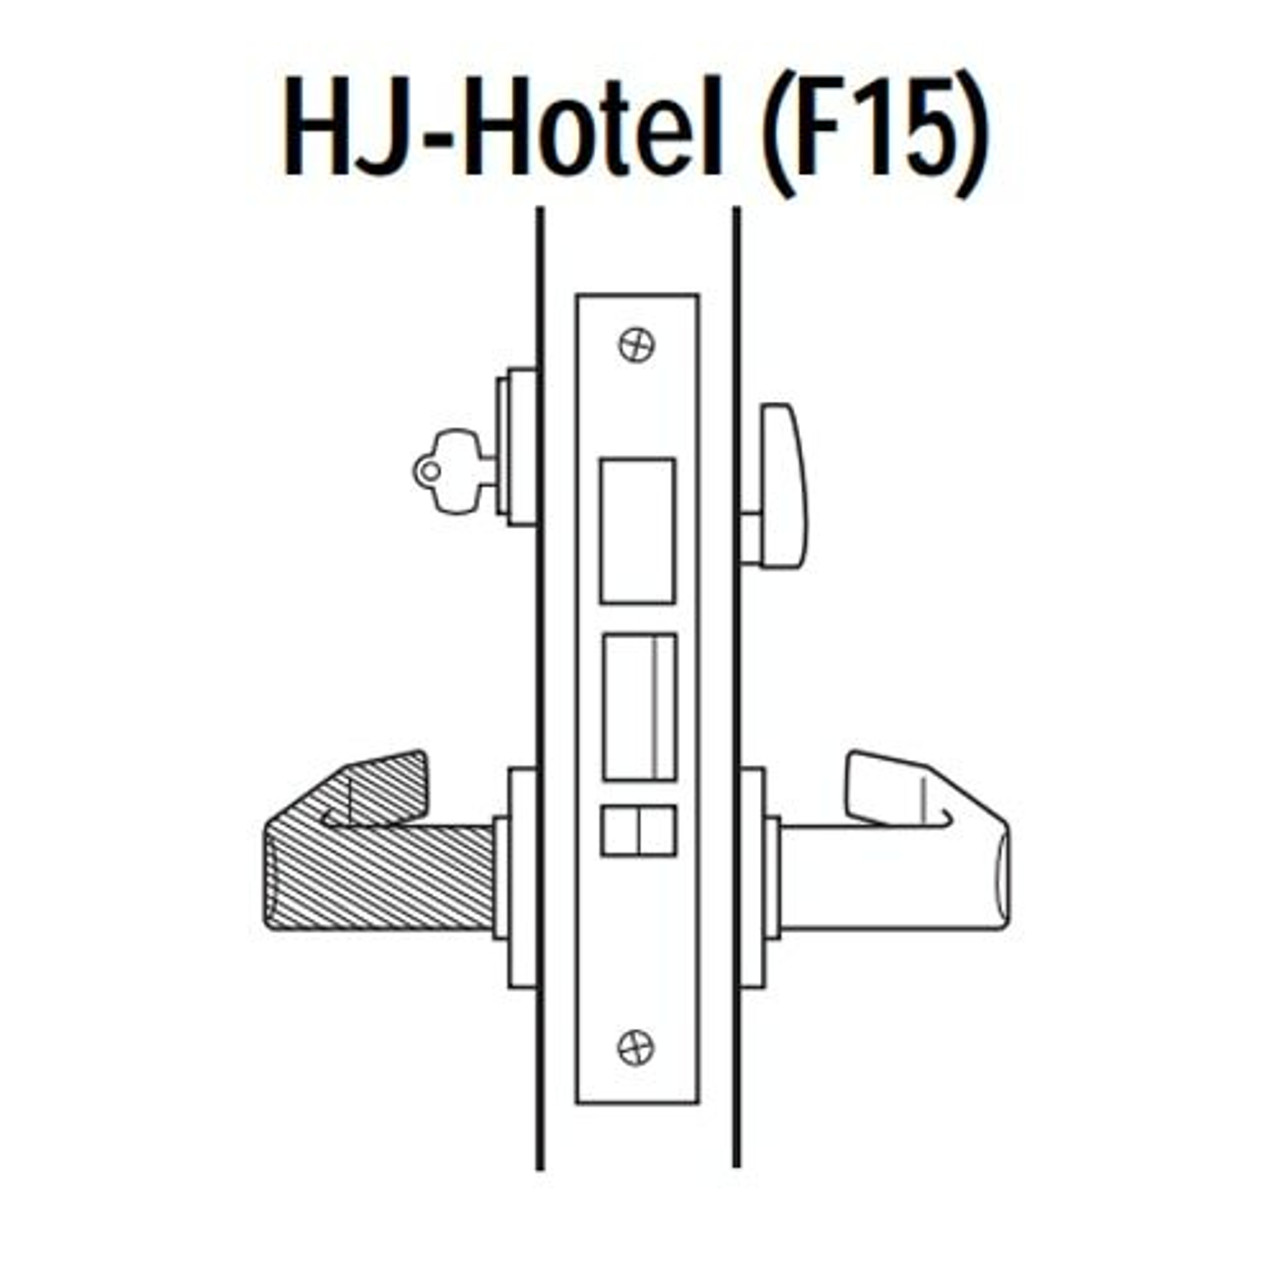 45H7HJ17LM690 Best 40H Series Hotel with Deadbolt Heavy Duty Mortise Lever Lock with Gull Wing LH in Dark Bronze